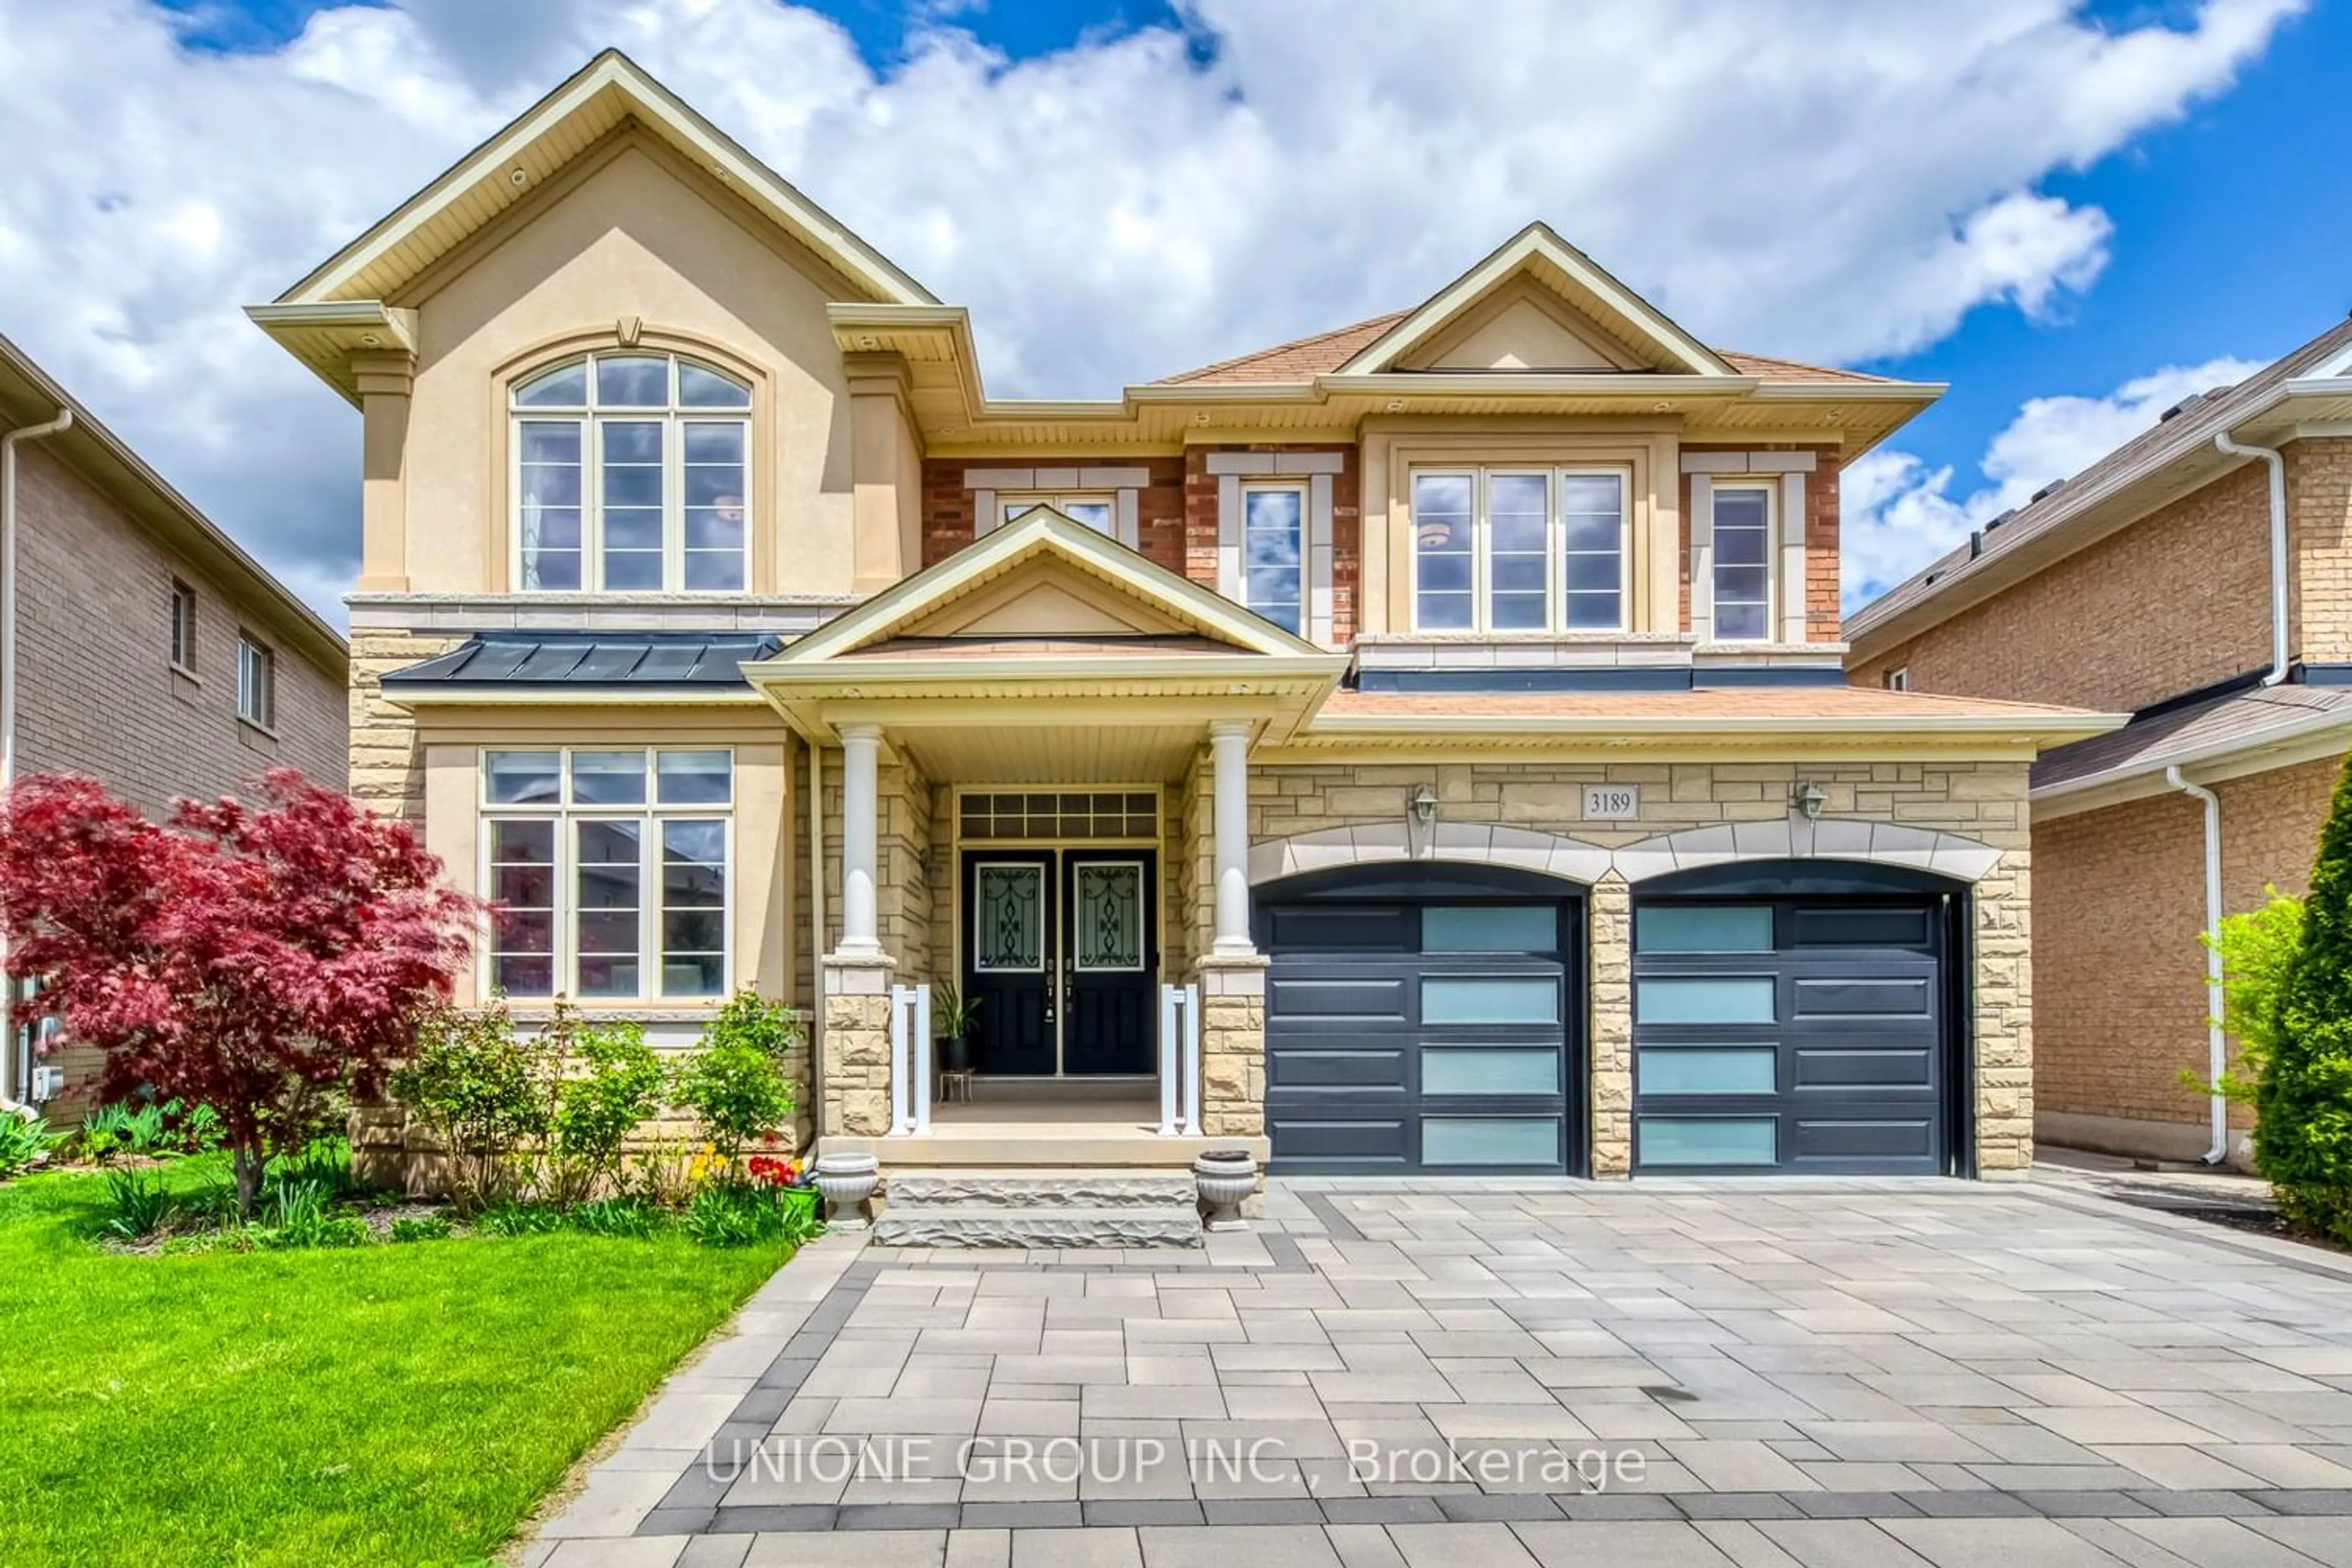 Home with brick exterior material for 3189 Trailside Dr, Oakville Ontario L6M 0P3